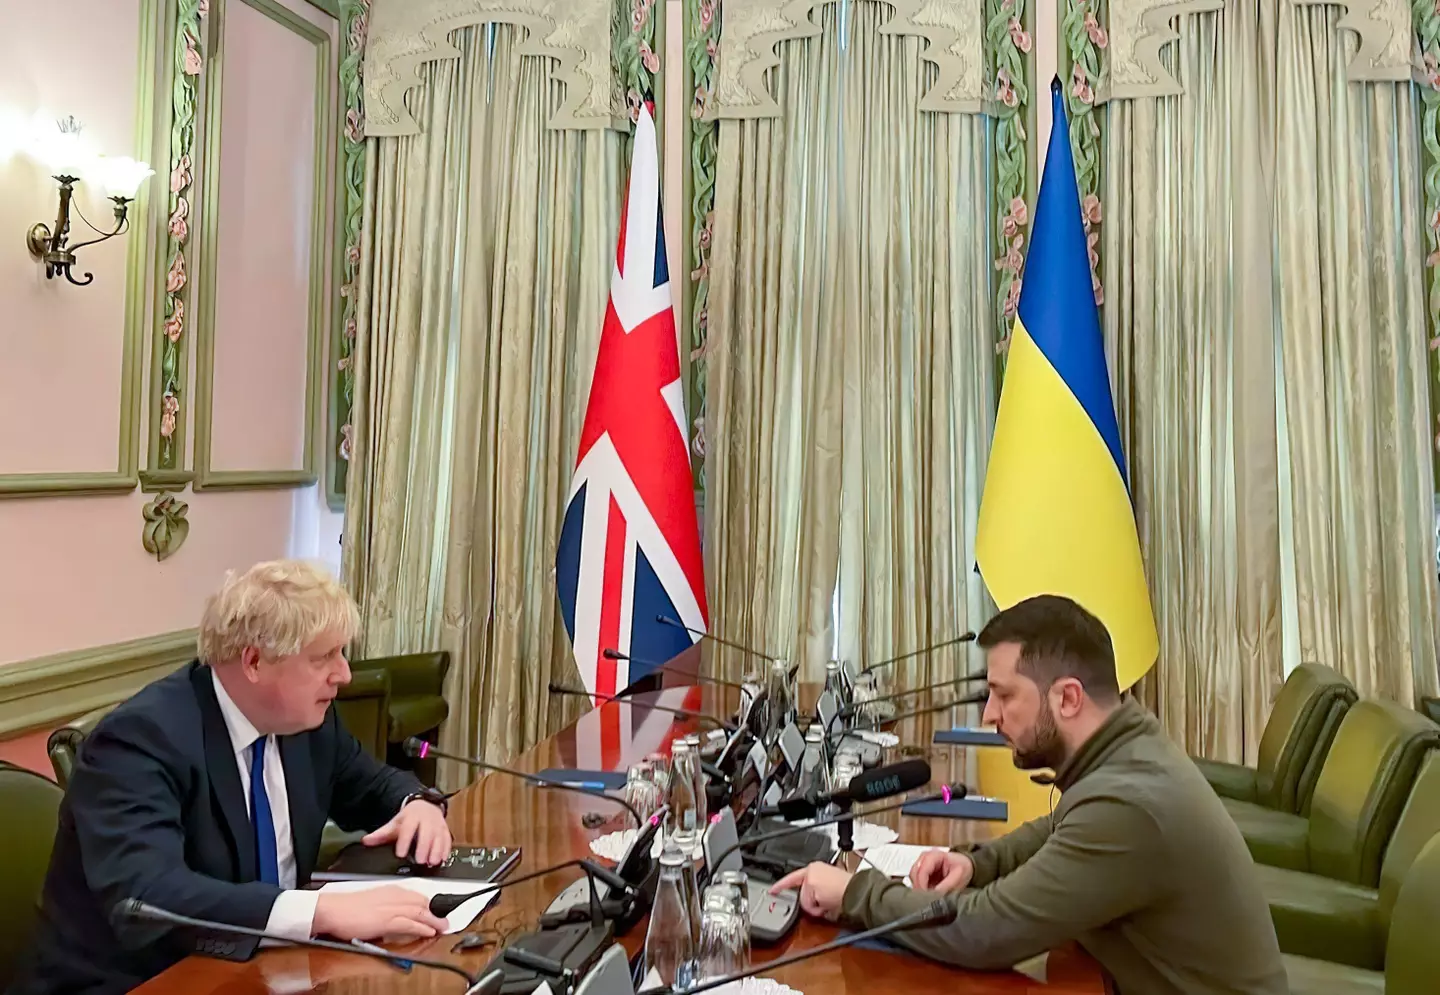 Zelenskyy described the PM as "brave" following a visit to Kyiv.